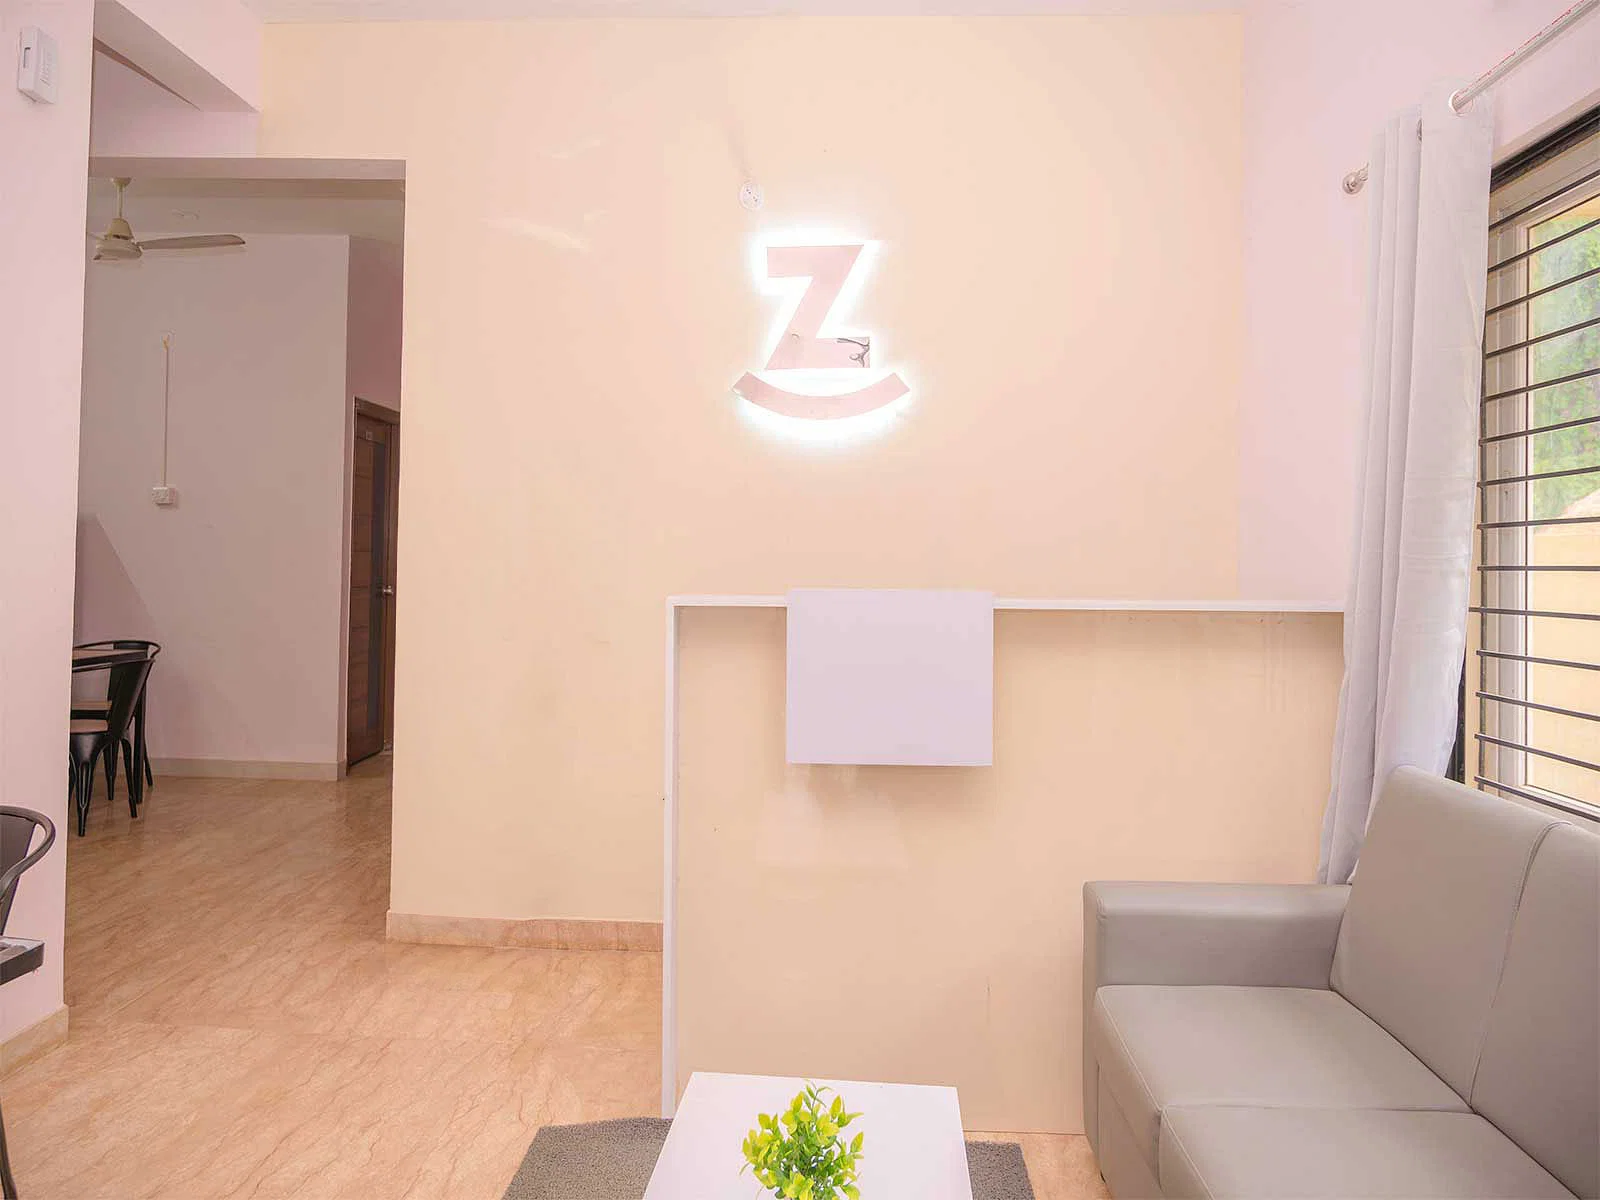 Affordable single rooms for students and working professionals in Whitefield-Bangalore-Zolo Neel